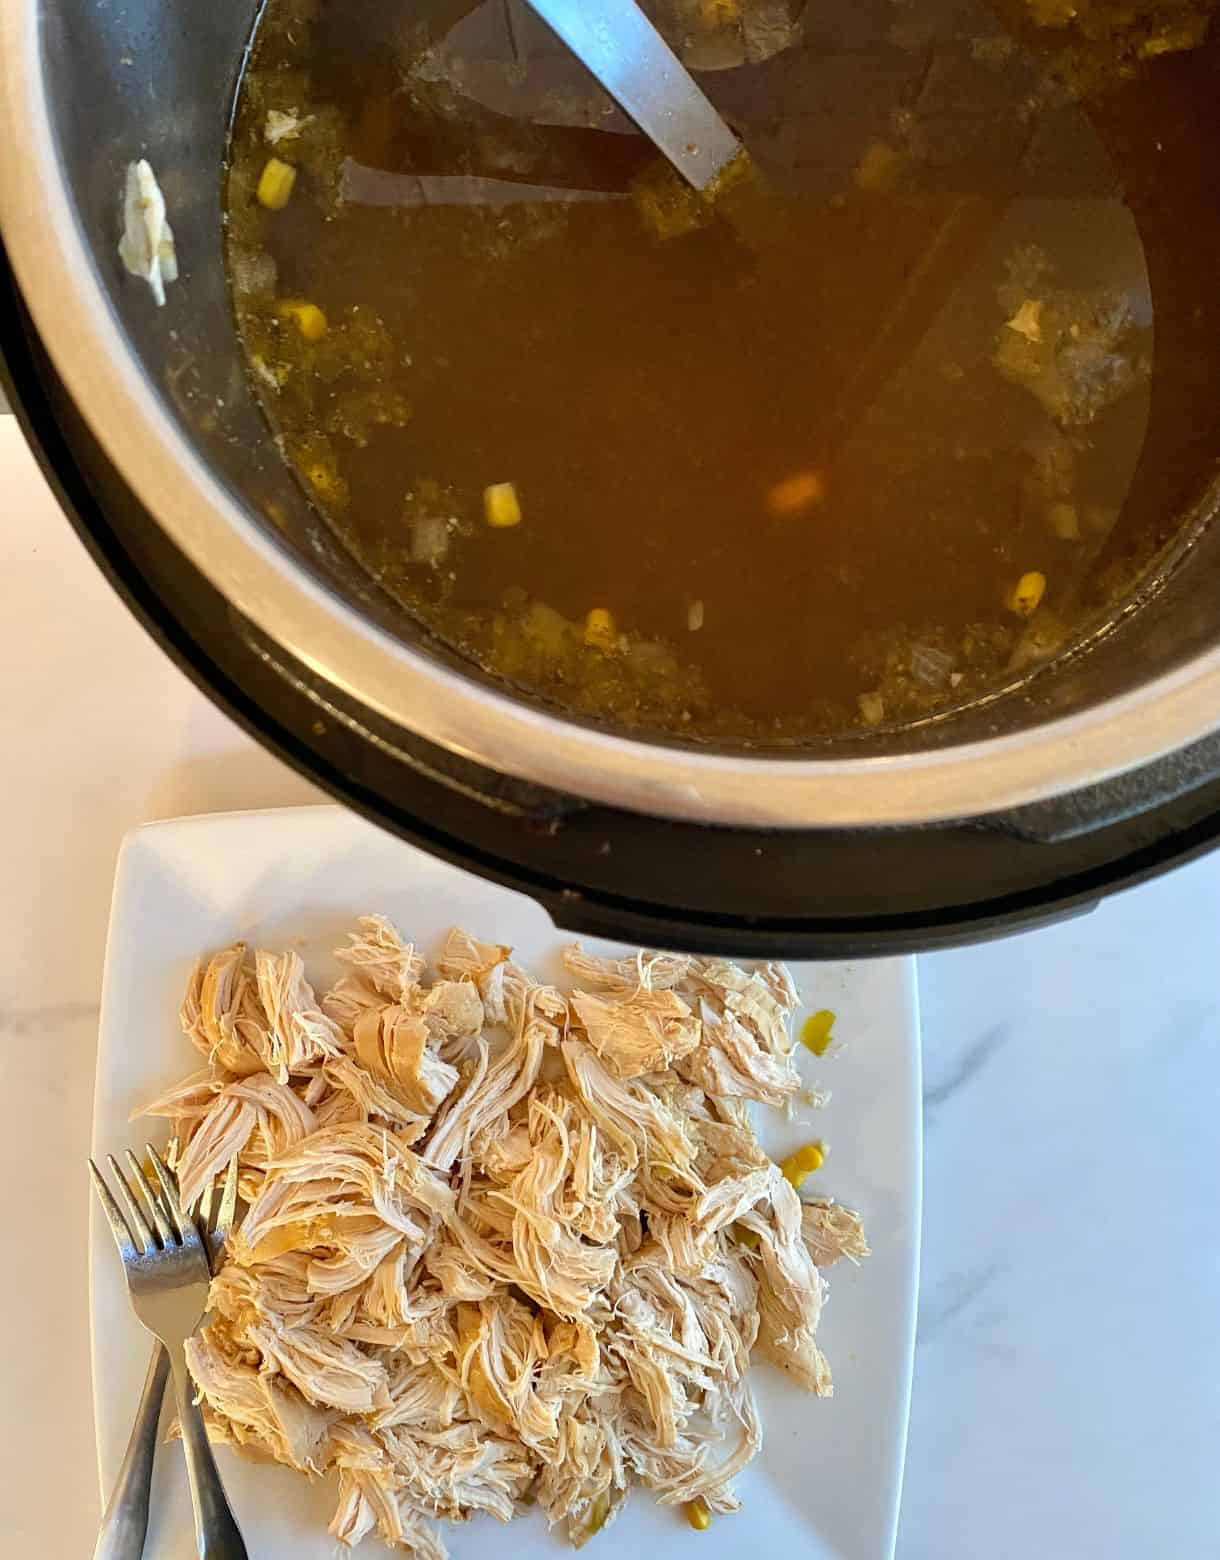 A slow cooker full of Green Chile Chicken Soup and a plate with shredded chicken ready to add to the soup.